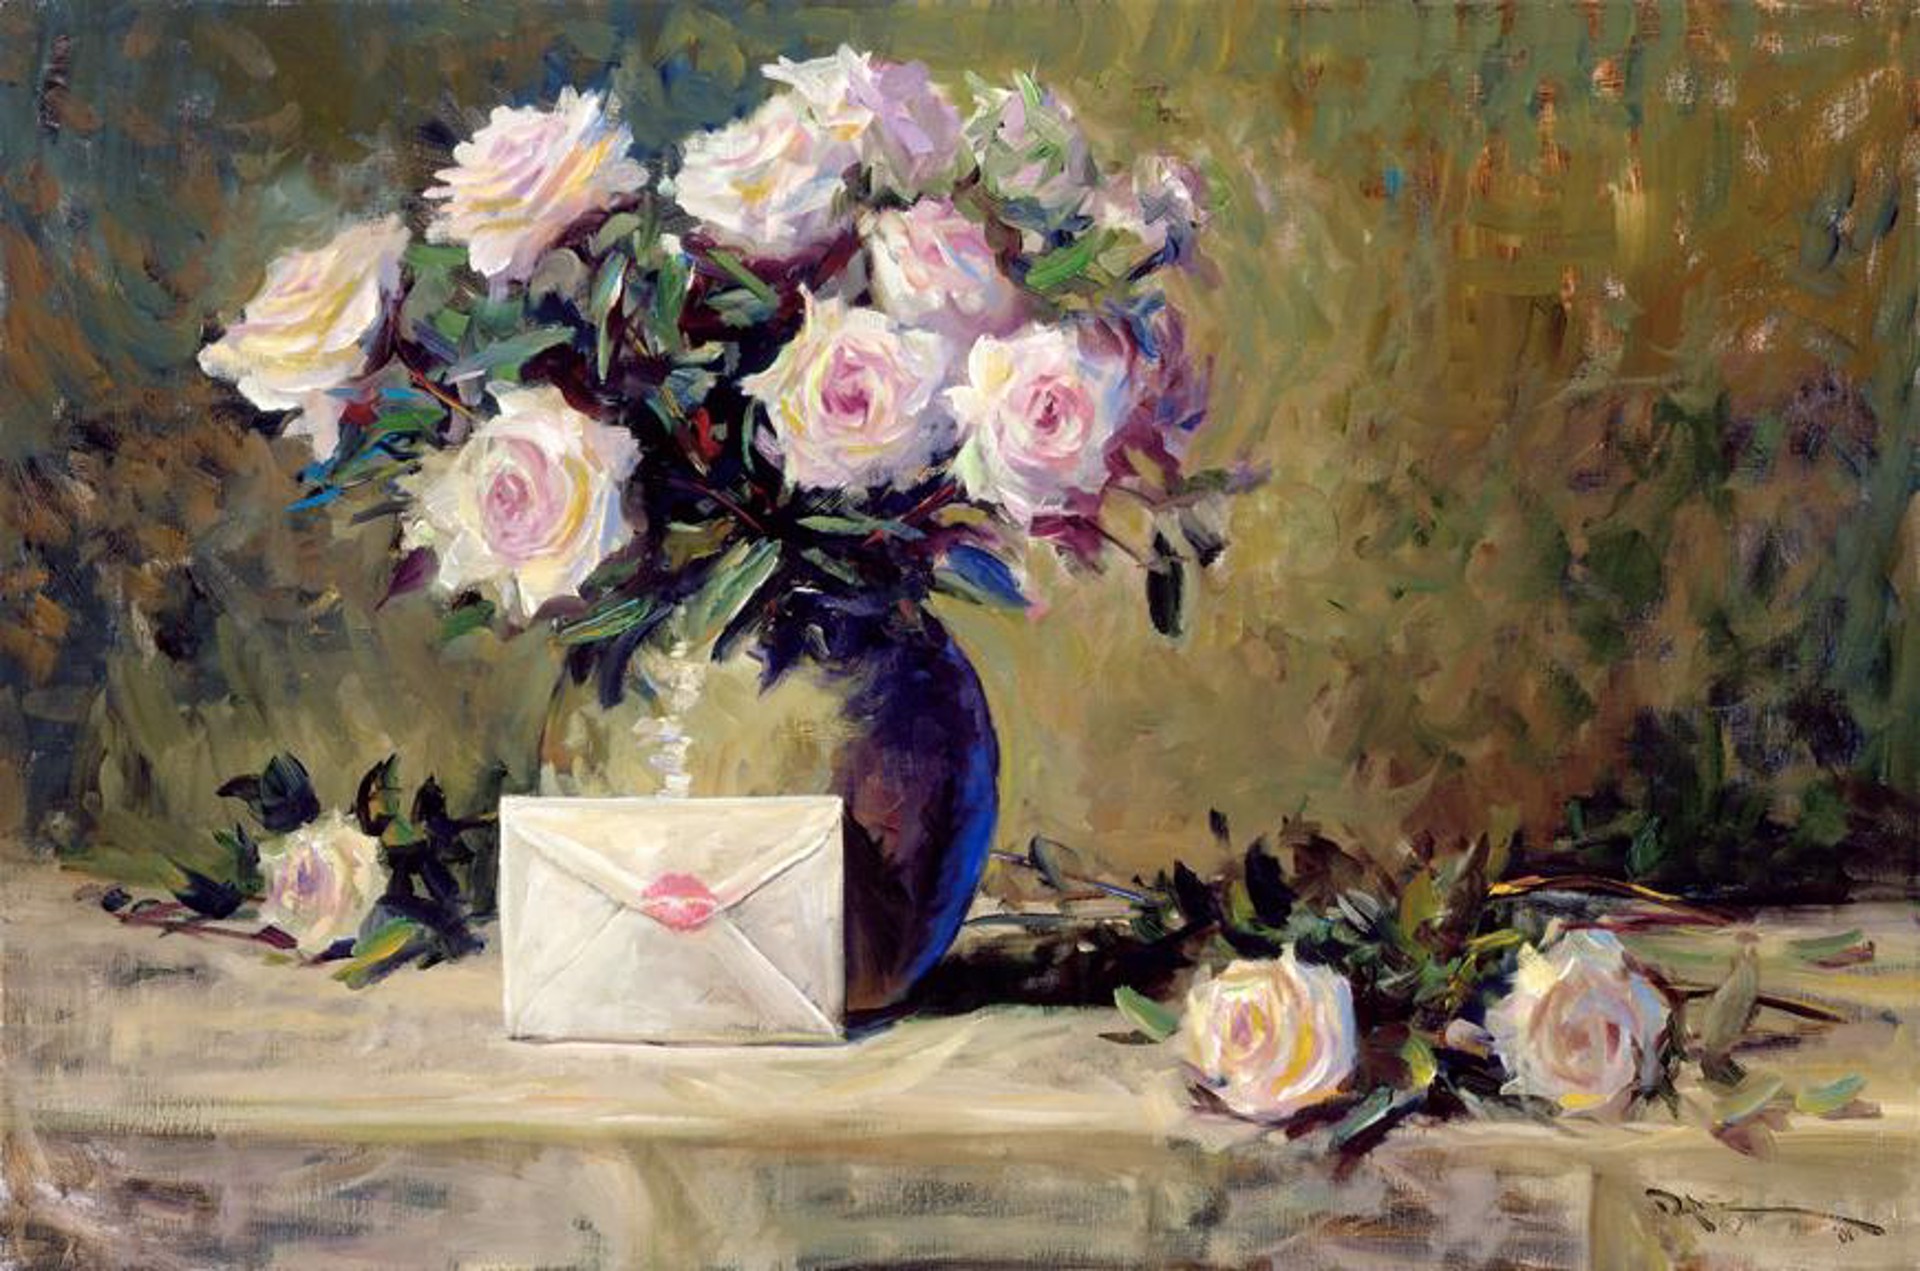 Roses and Love Letter by John Carroll Doyle